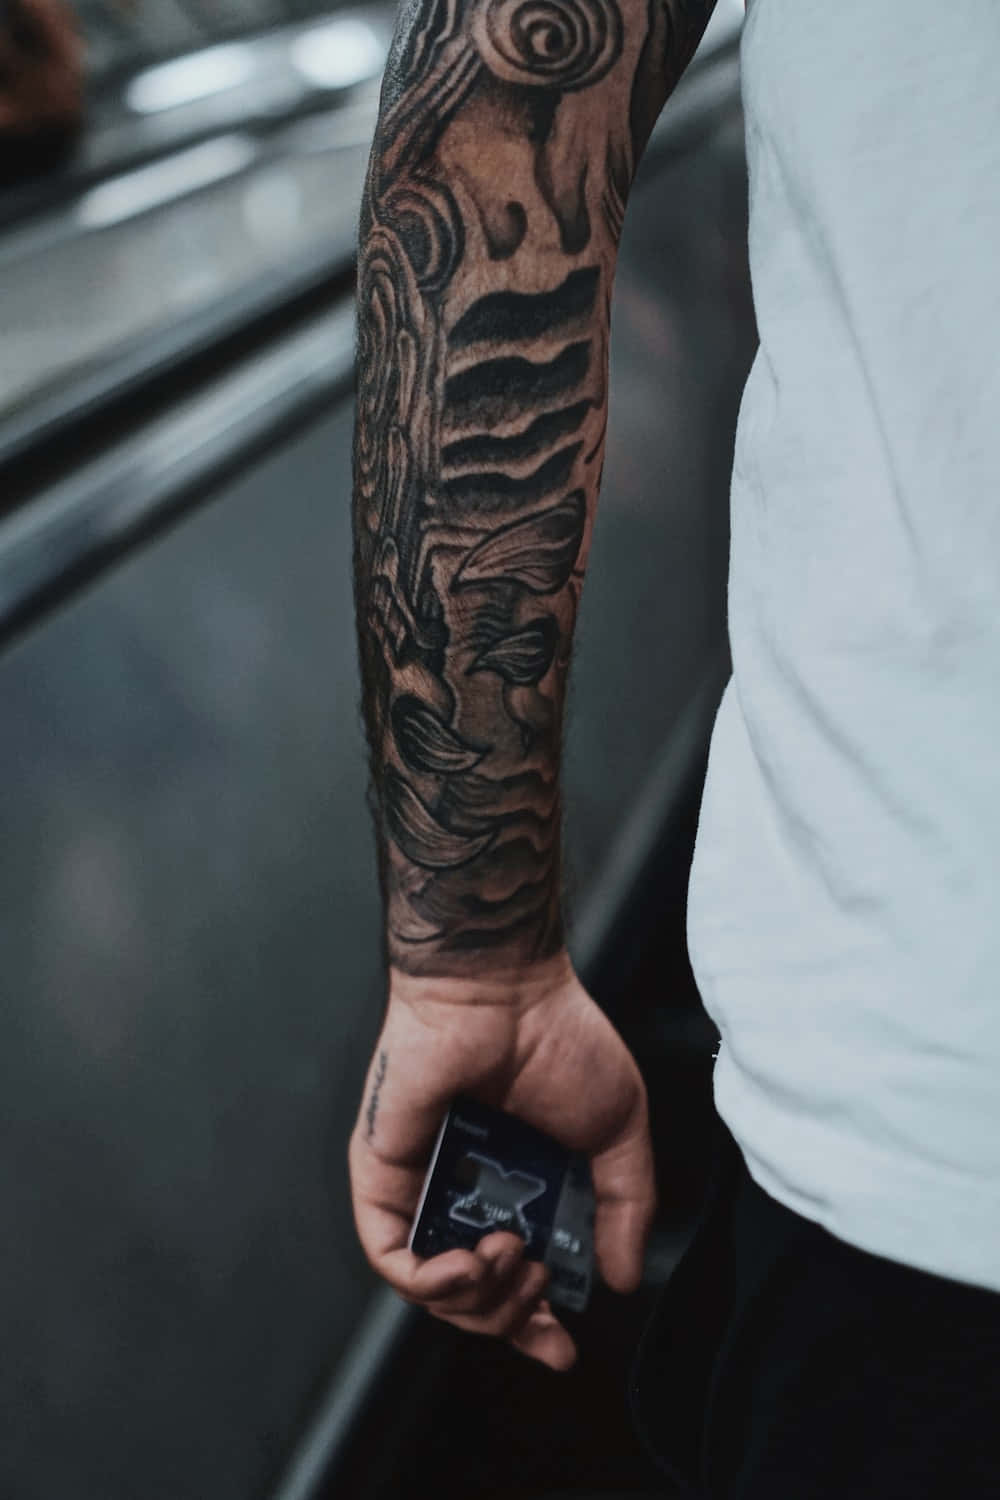 Arm Tattoo Of Man Holding Cigarette Box Picture